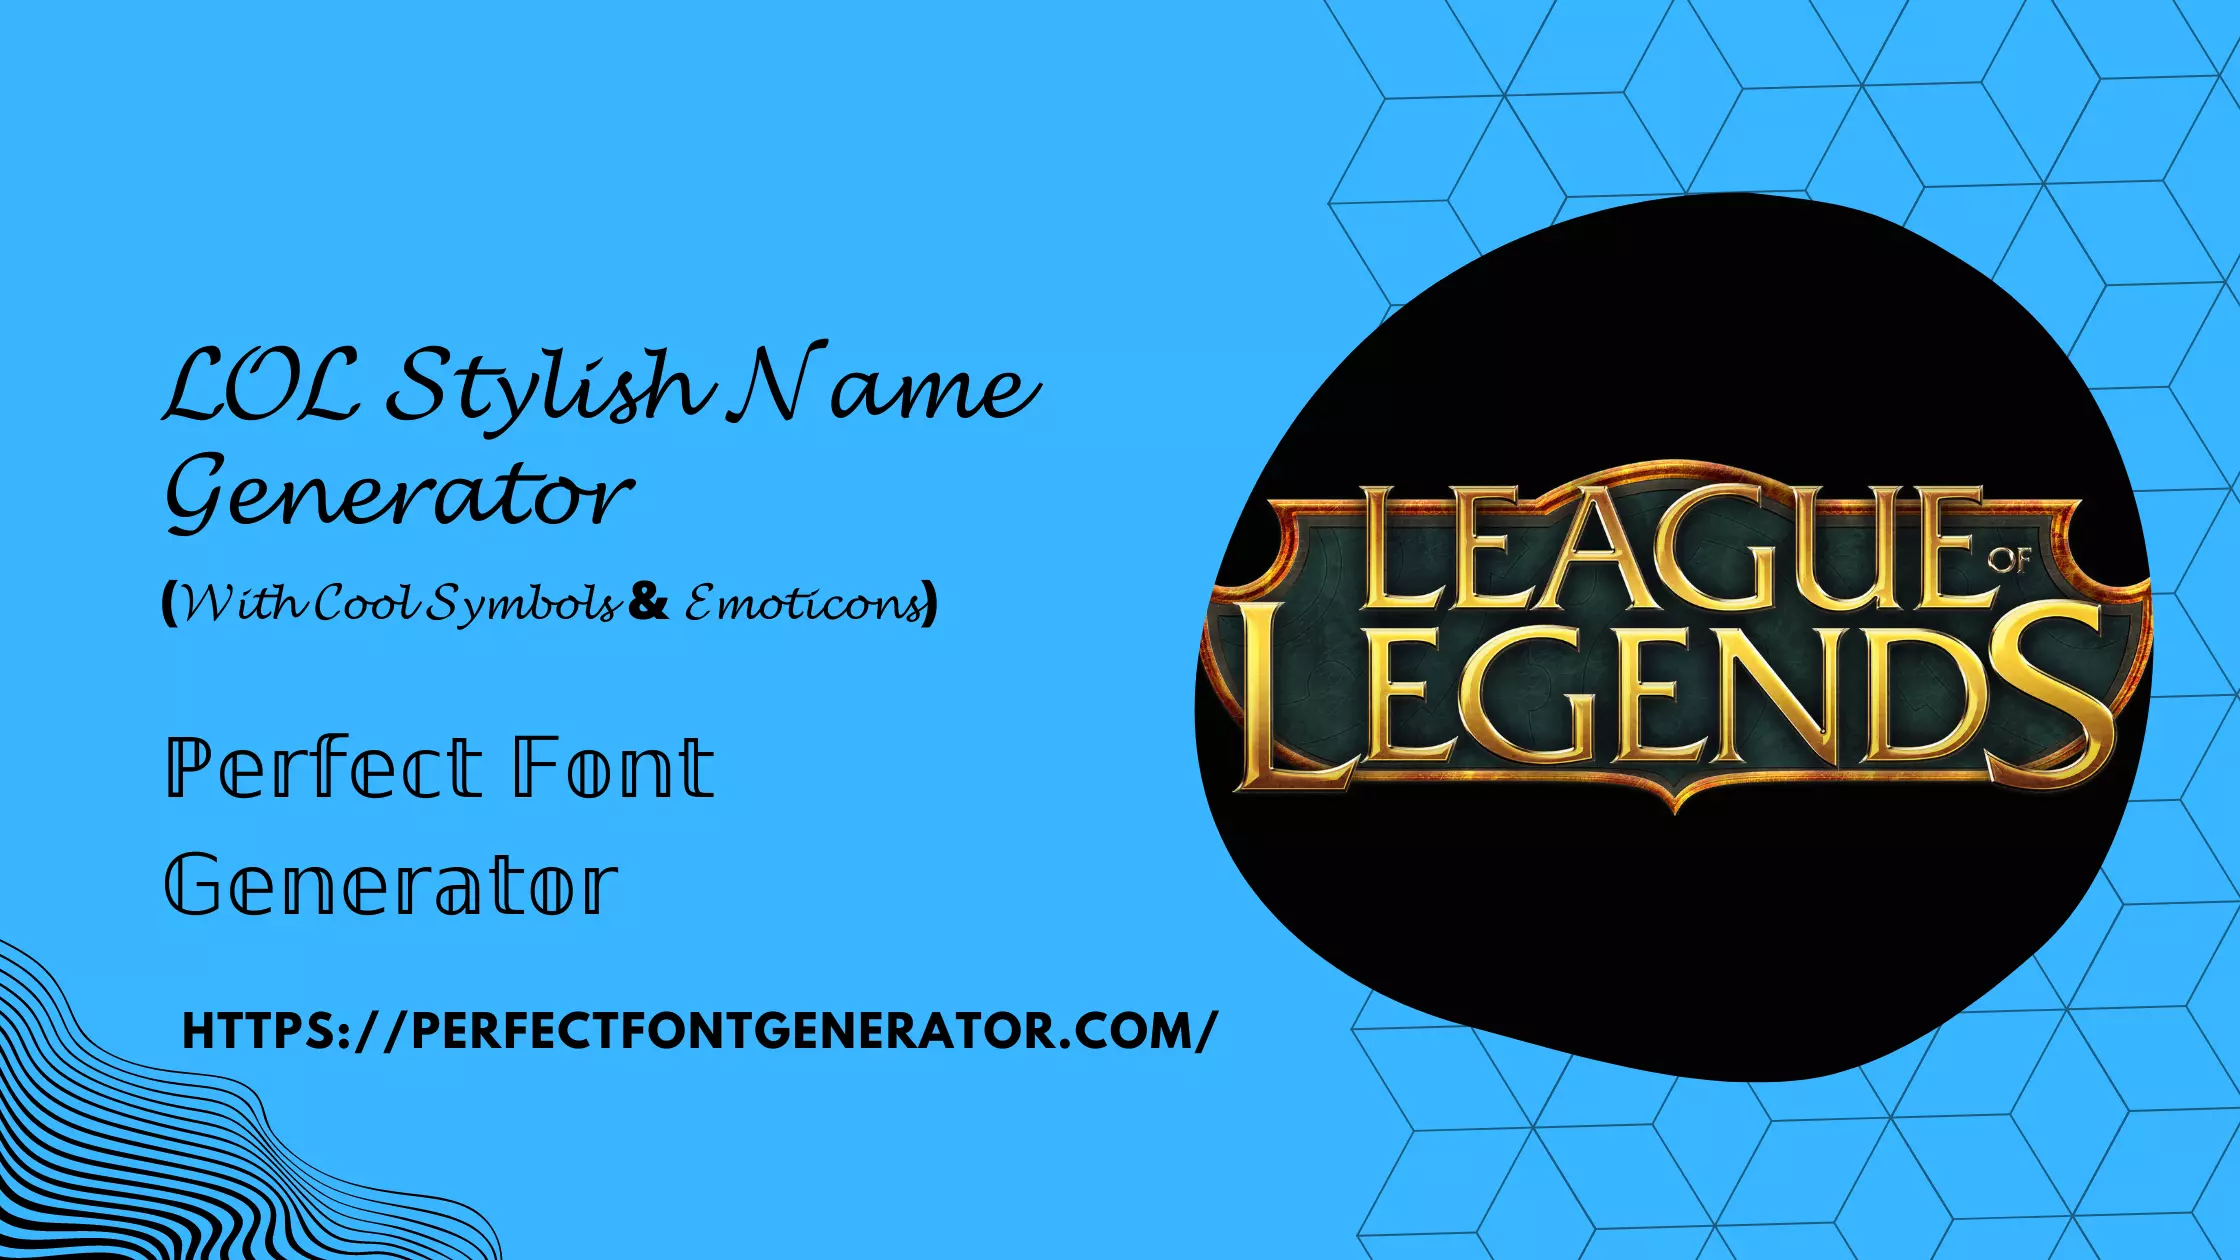 league-of-legends-lol-stylish-name-font-text-generator-with-cool-symbols-online-copy-paste-tool